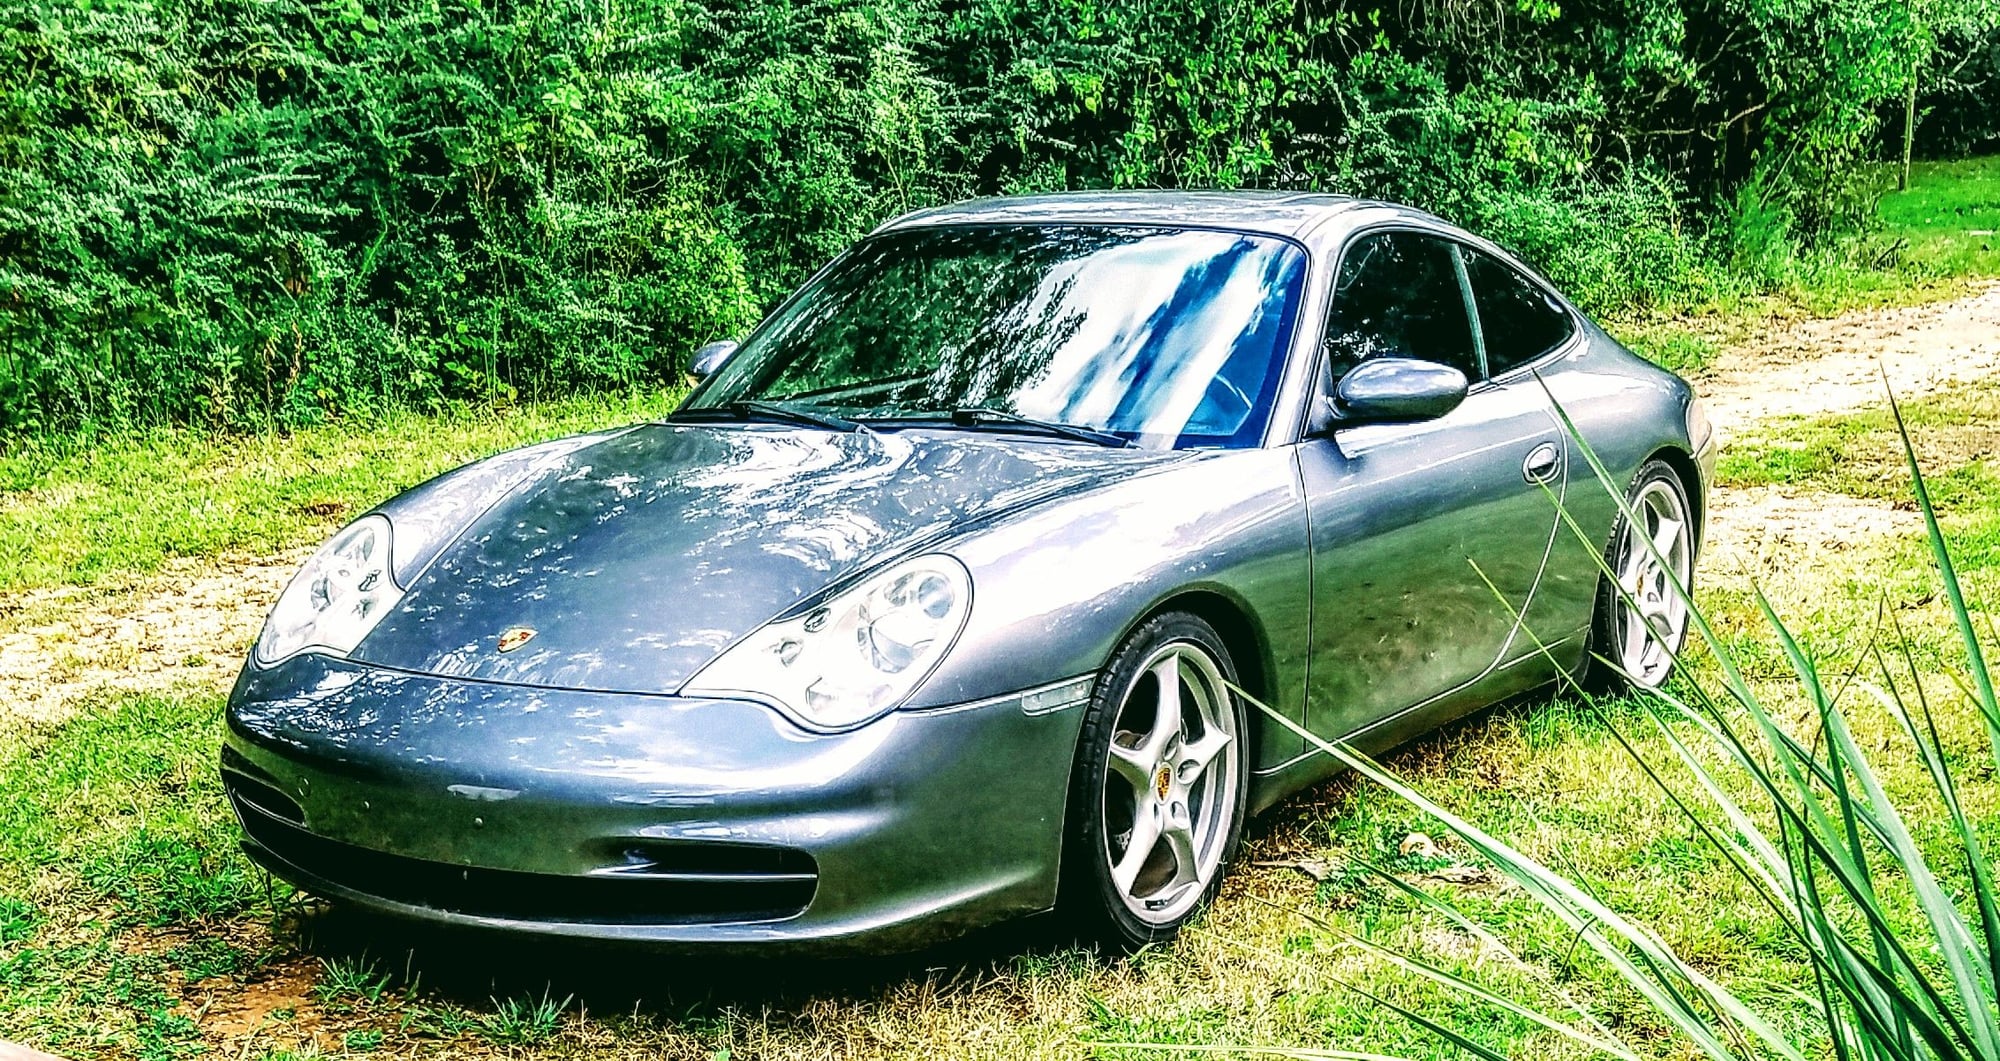 2002 Porsche 911 - 2002 996 C2 - Used - VIN WP0AA29962S620180 - 60,800 Miles - 6 cyl - 2WD - Manual - Coupe - Gray - Huntsville, AL 35803, United States